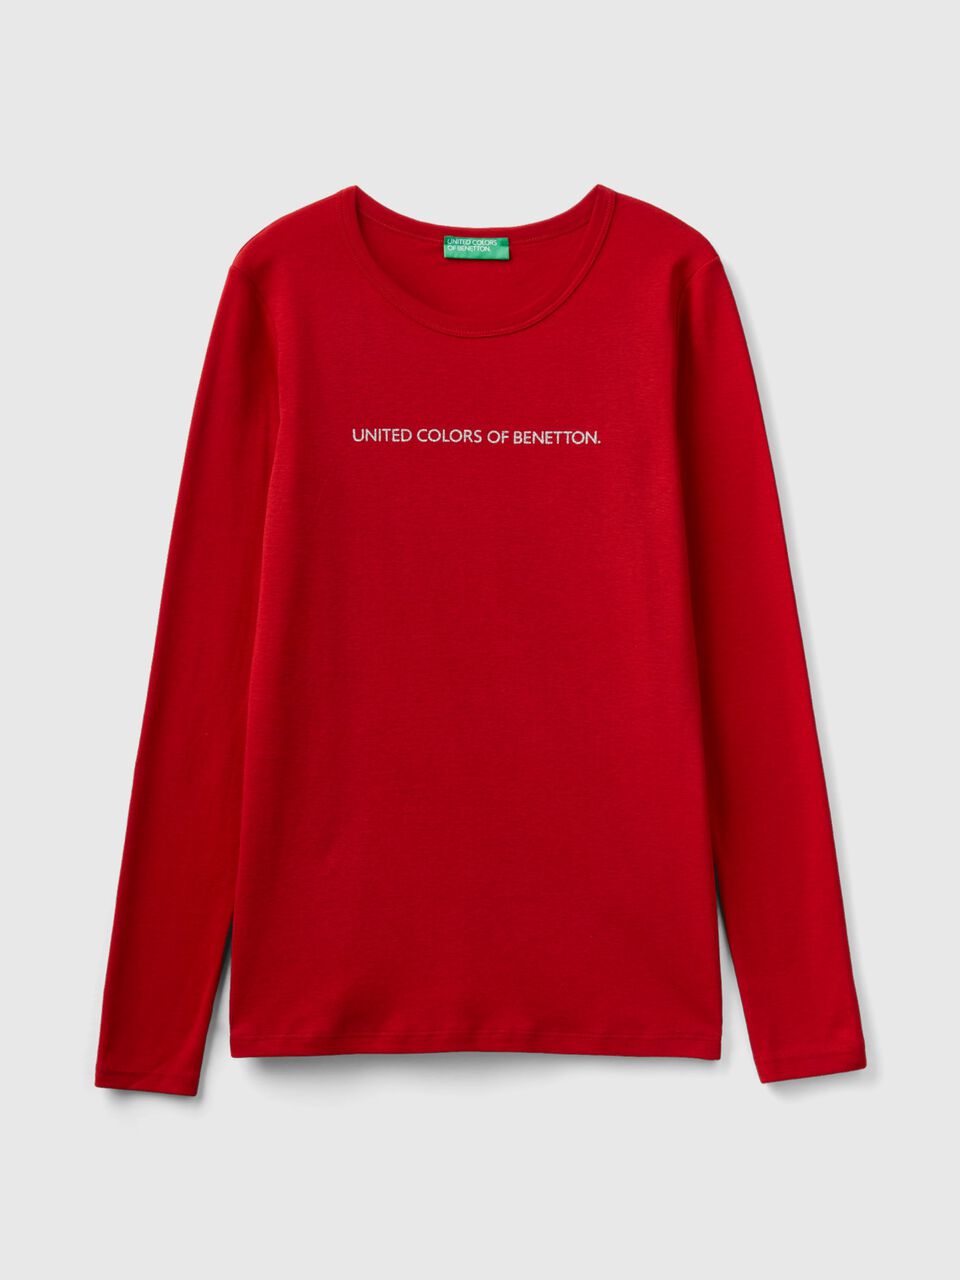 Long sleeve red t-shirt Red - Benetton 